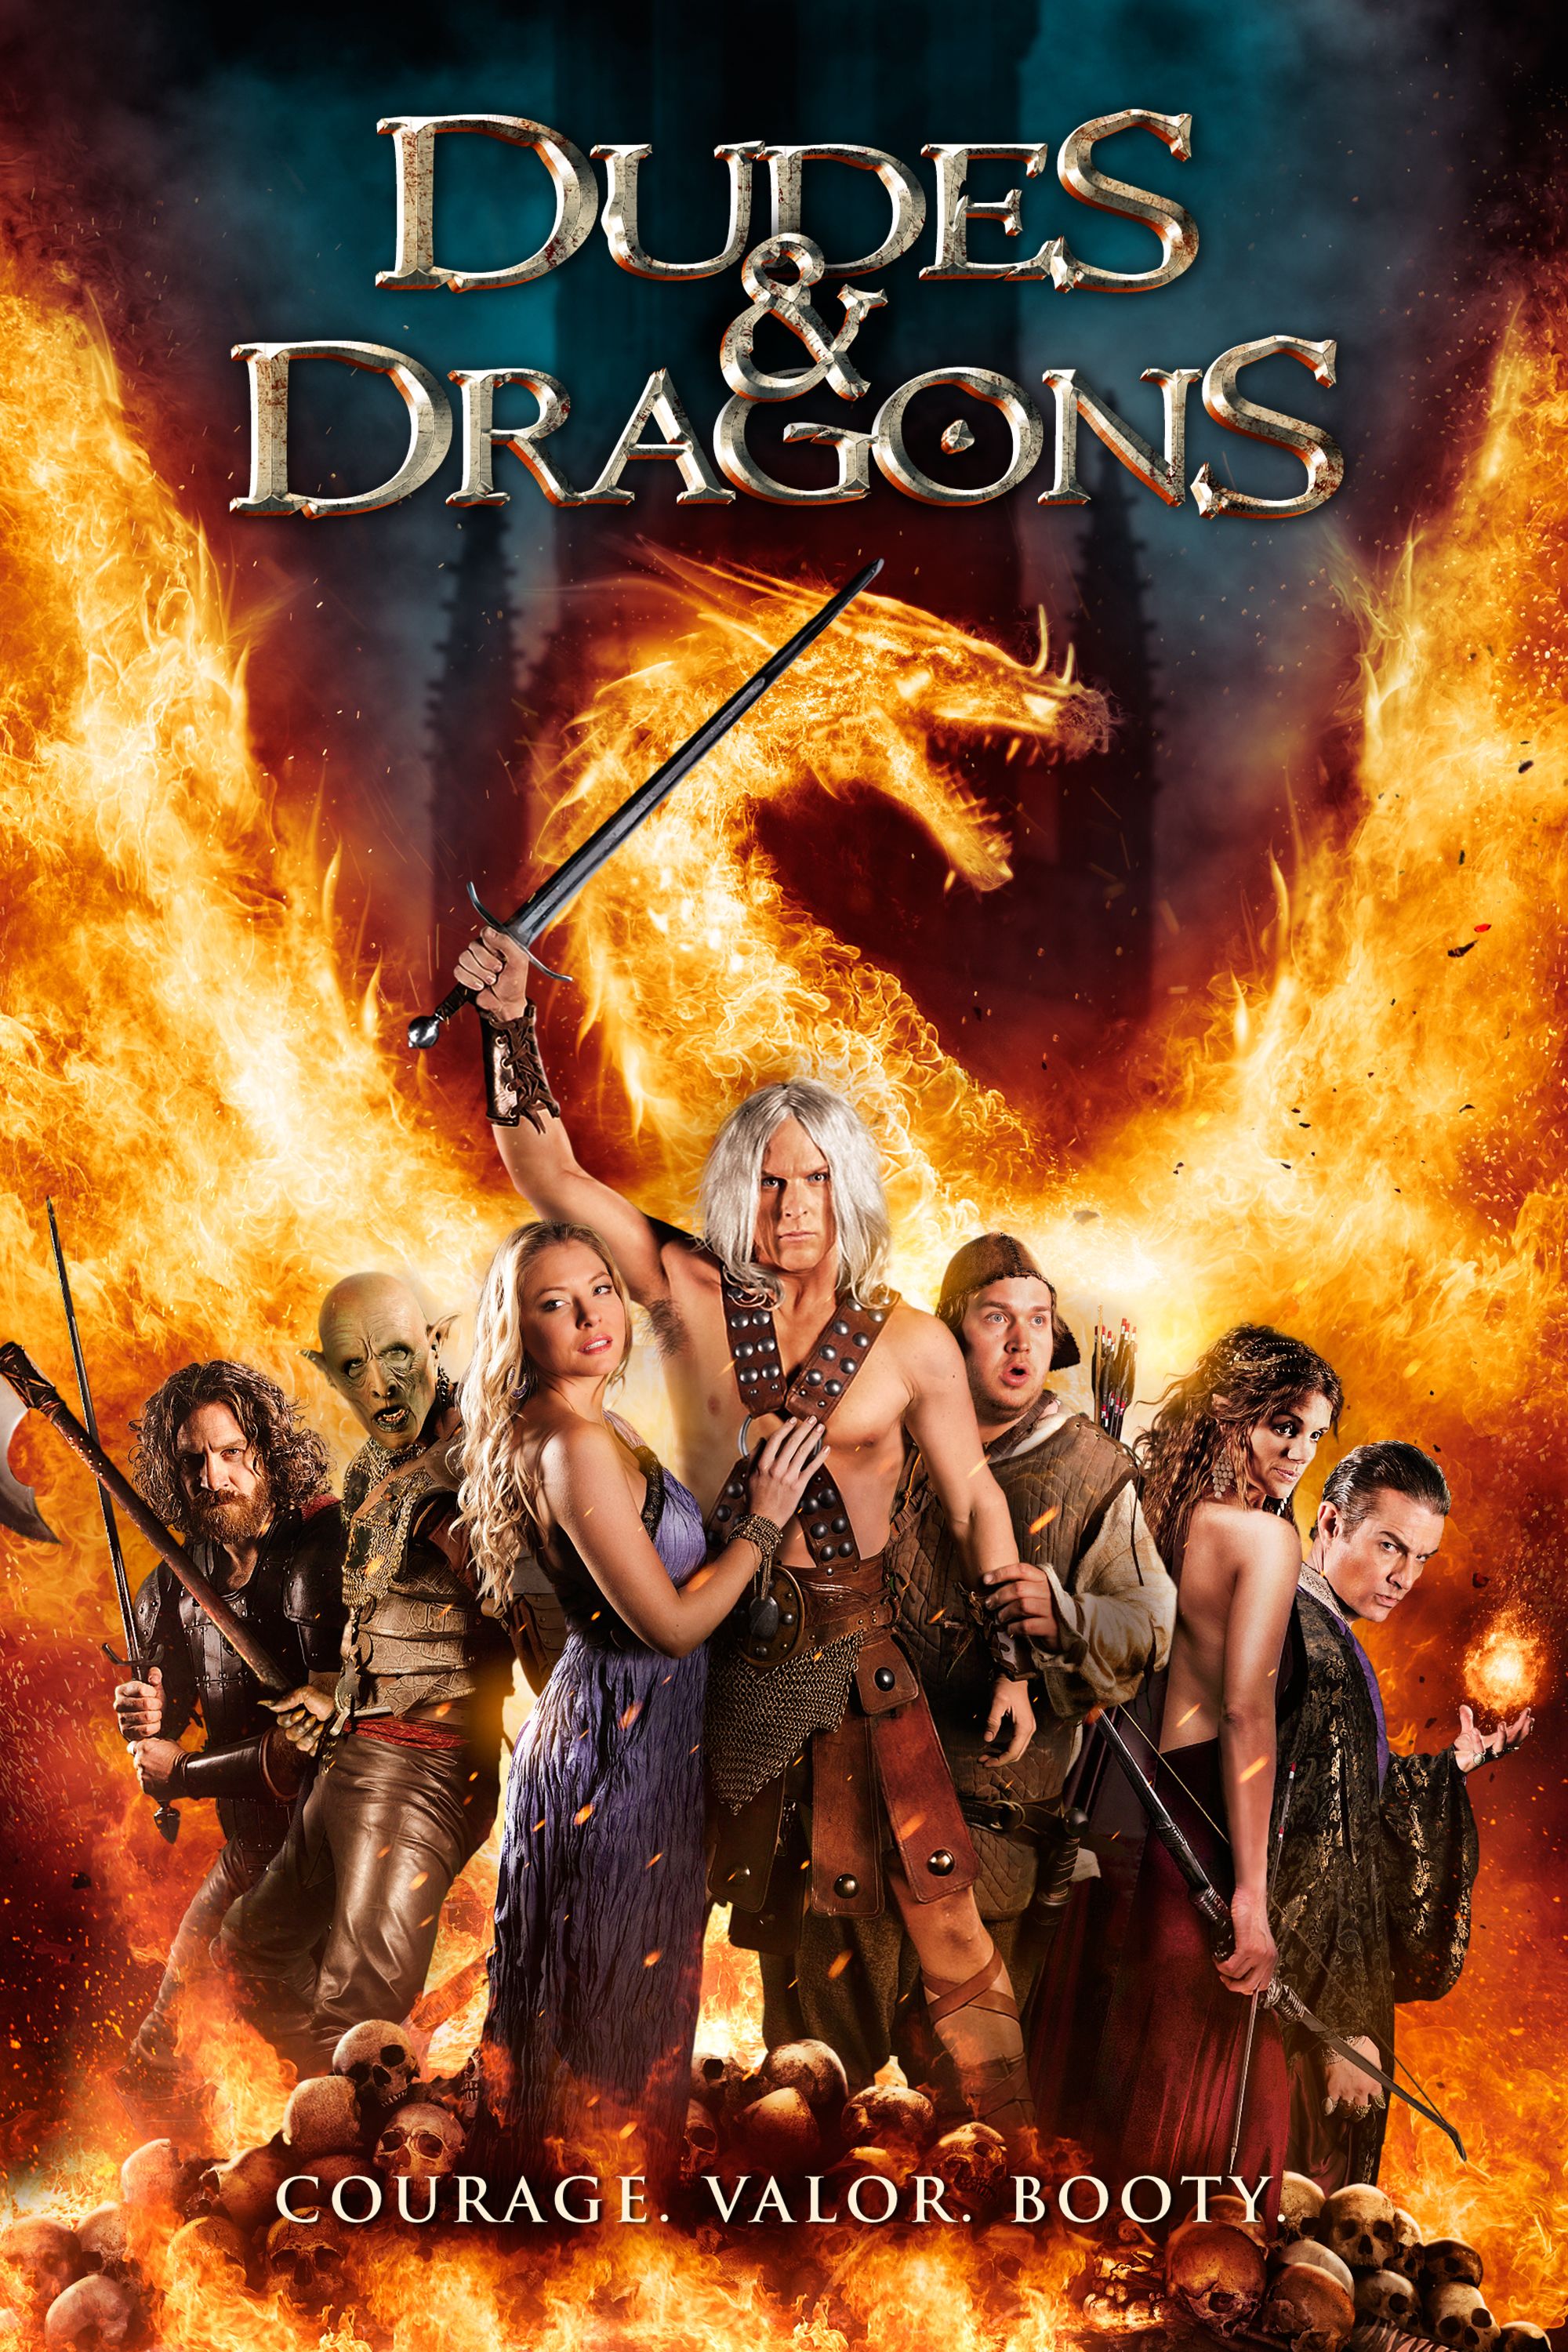 Dudes And Dragons (2015) Hindi Dubbed BluRay download full movie